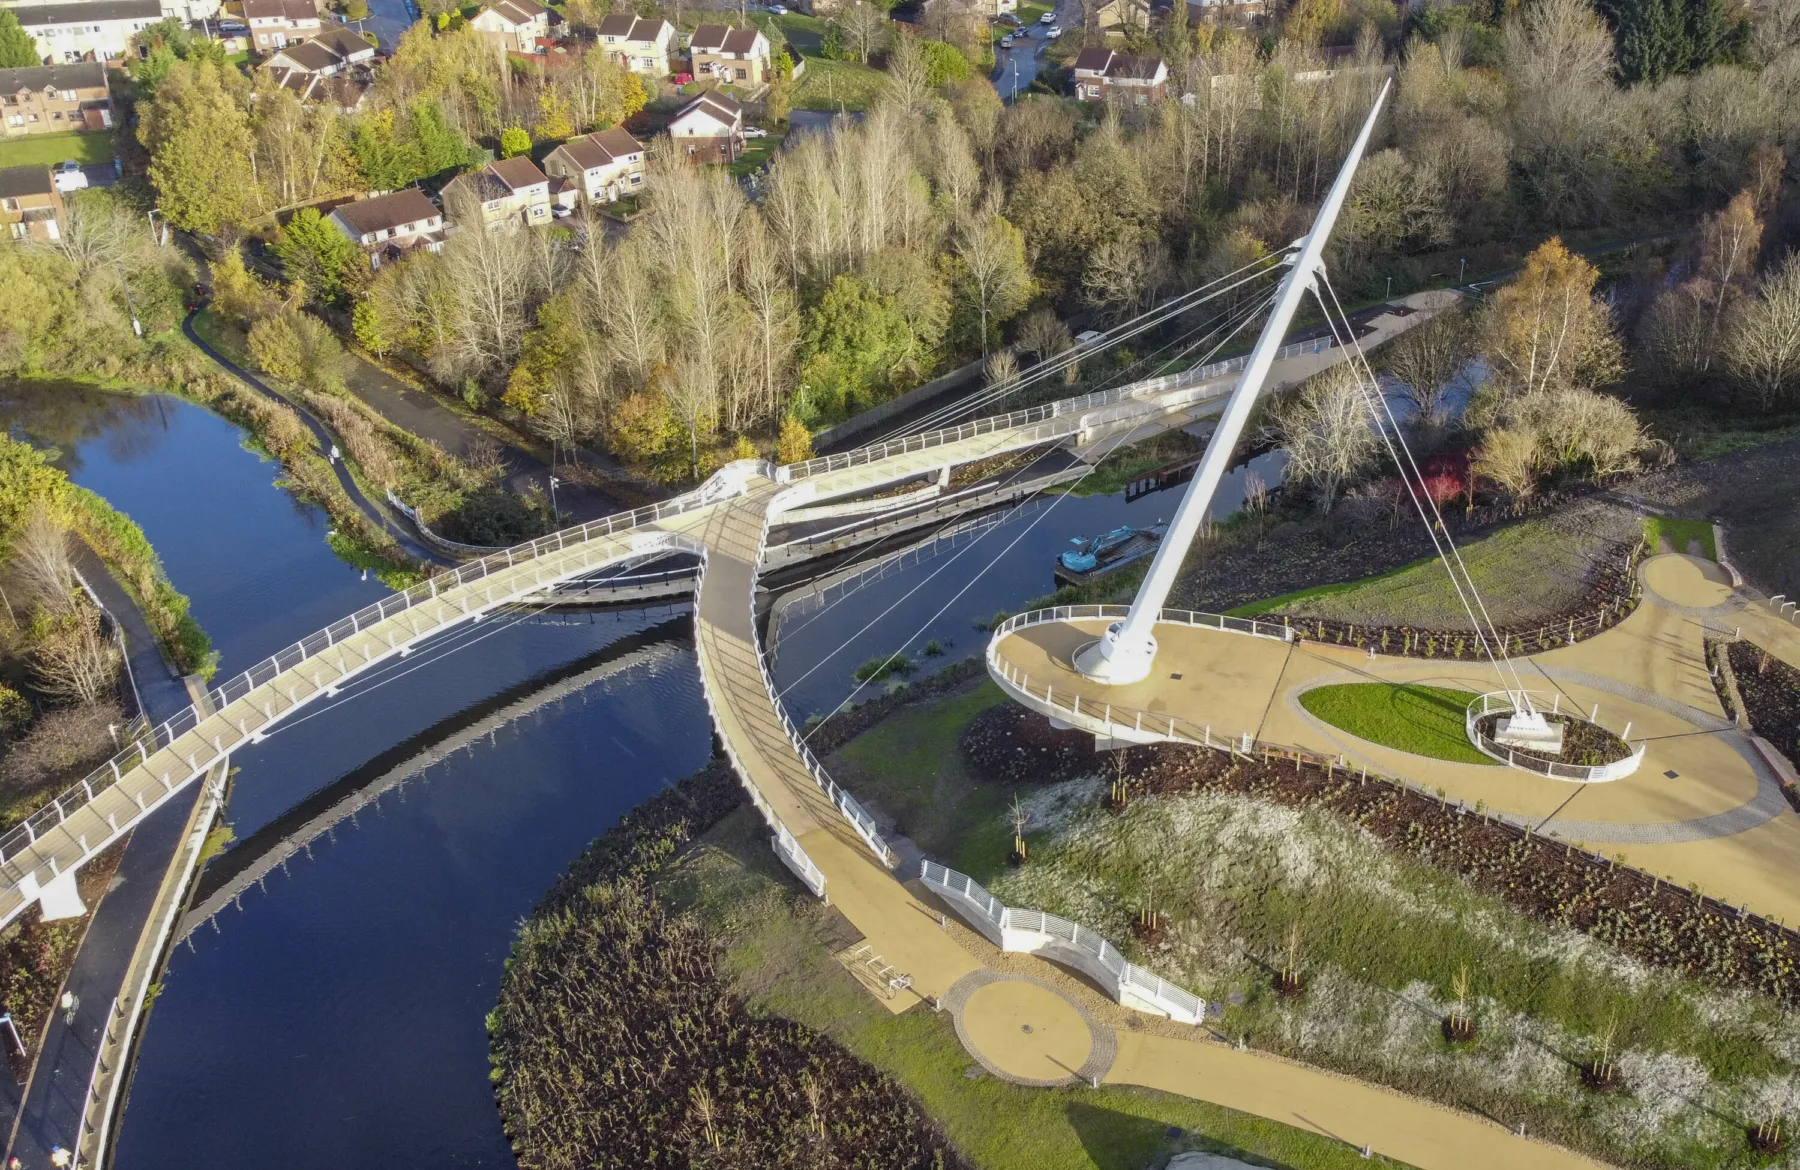 An aerial view of the Stockingfield Bridge, Glasgow. The cable-stayed pedestrian and cyclist footbridge connects three areas across a forked junction in the forth-clyde canal. The decks of the bridge are shown stretching across the canal, and landscaping around the tower and bridge entrances.